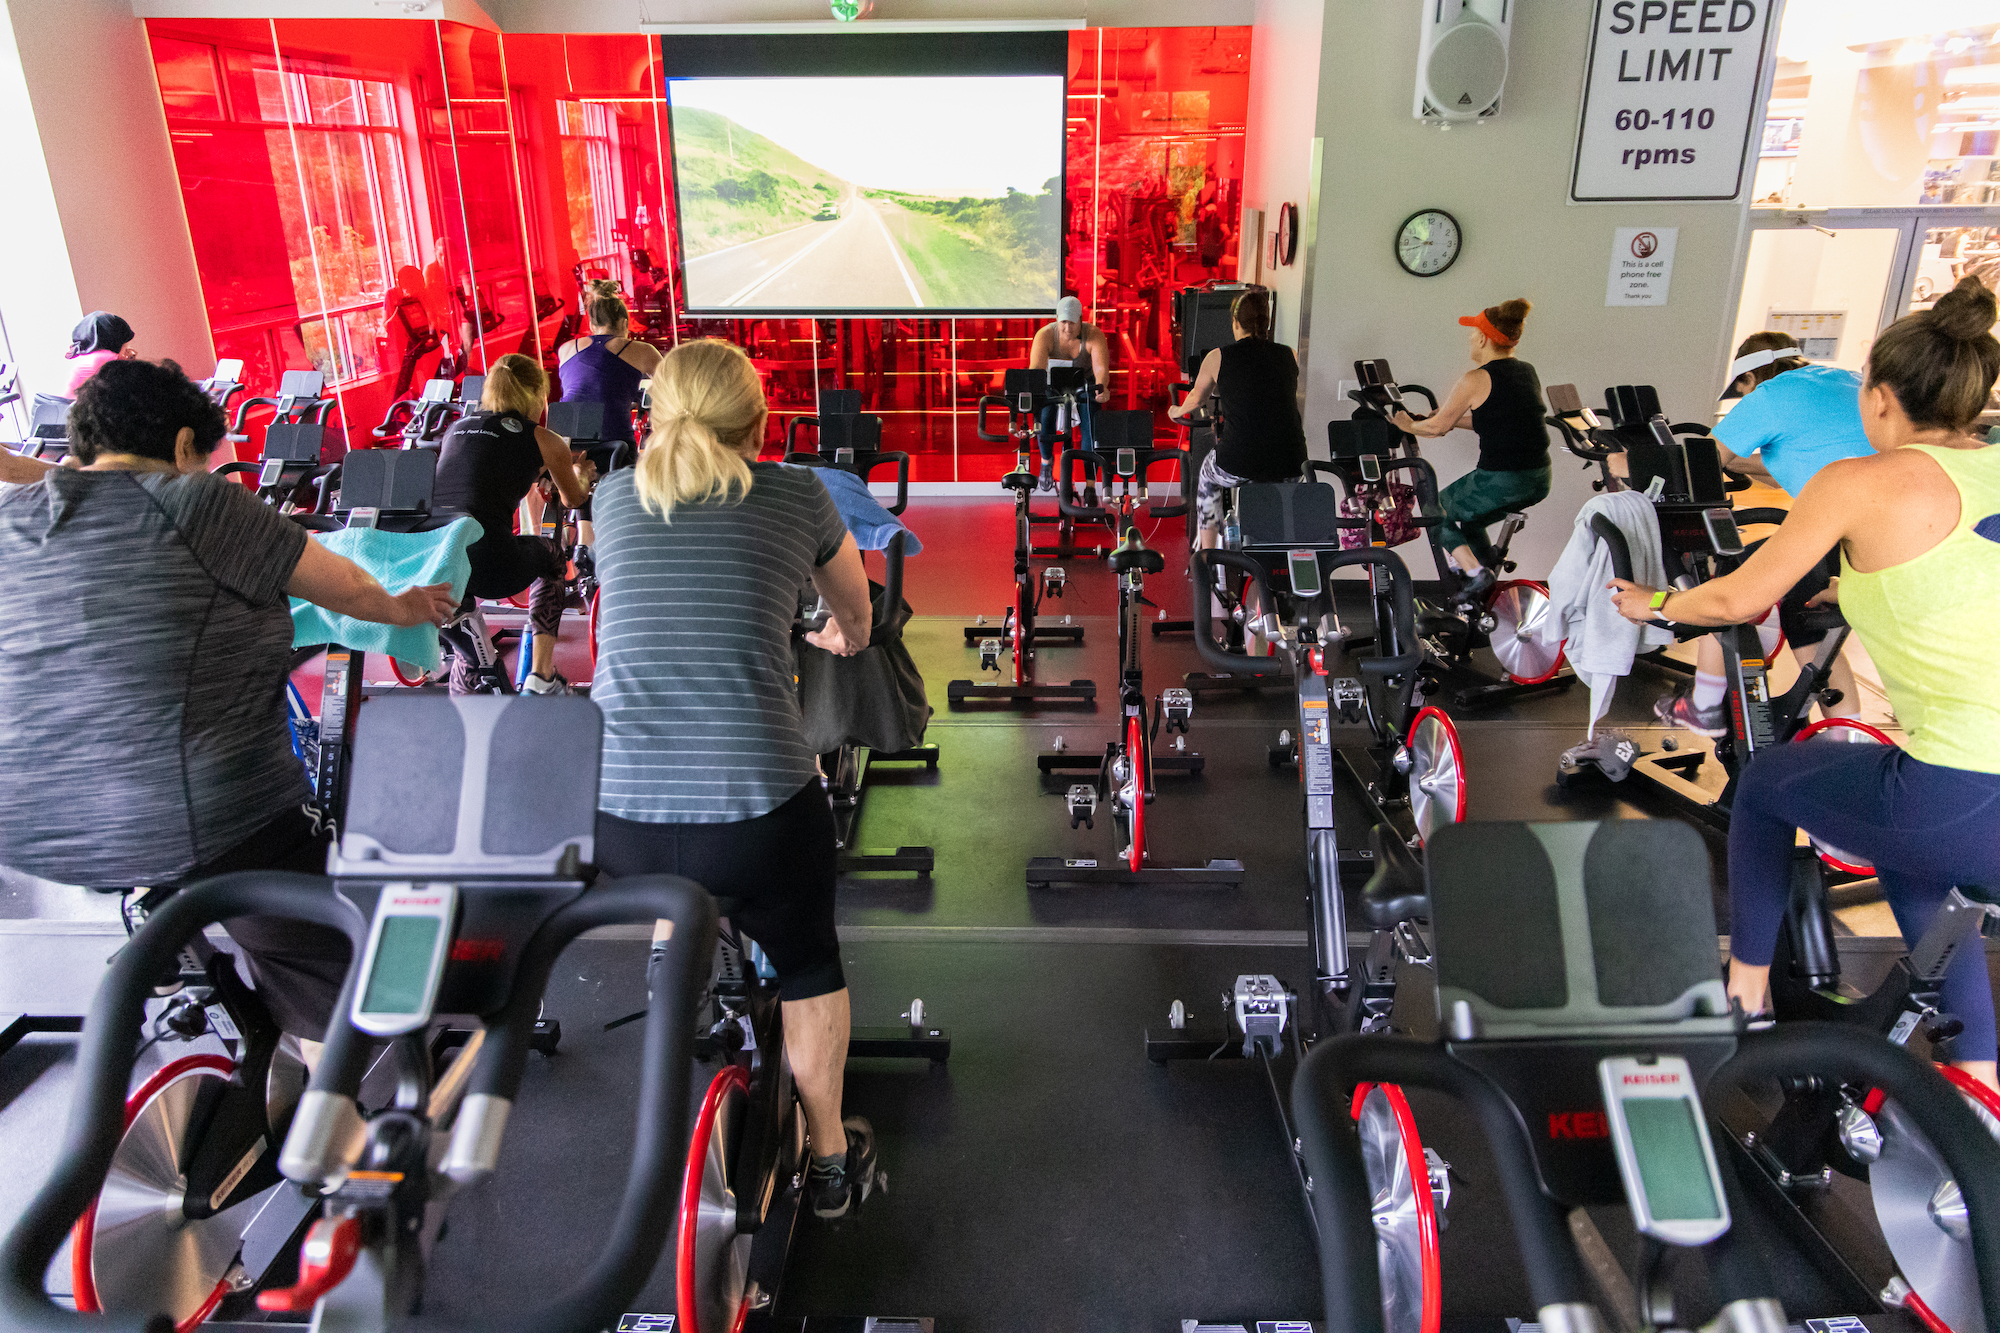 indoor cycle class with cinema seating and screen